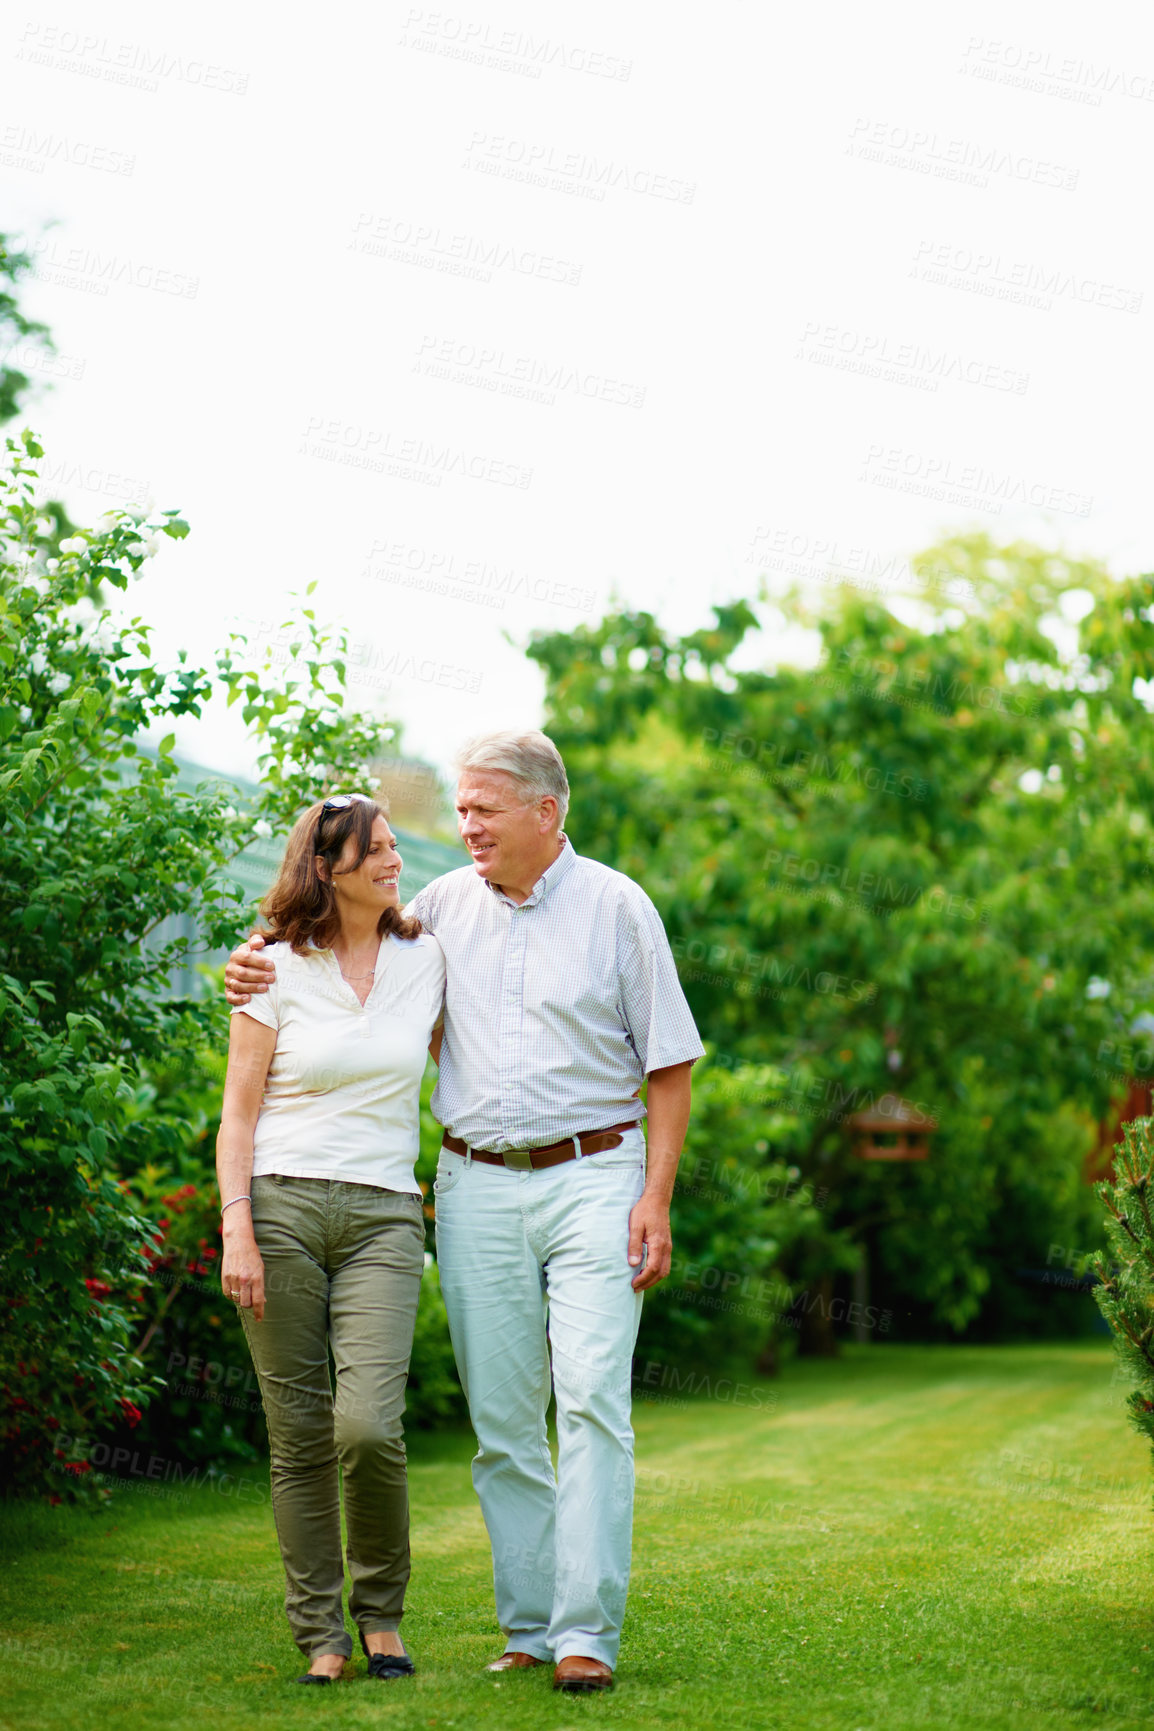 Buy stock photo Mature, holiday or happy couple hug in park or nature on a outdoor romantic walk for support. Wellness, freedom or senior man with woman bonding, care or enjoying date or retirement together outside